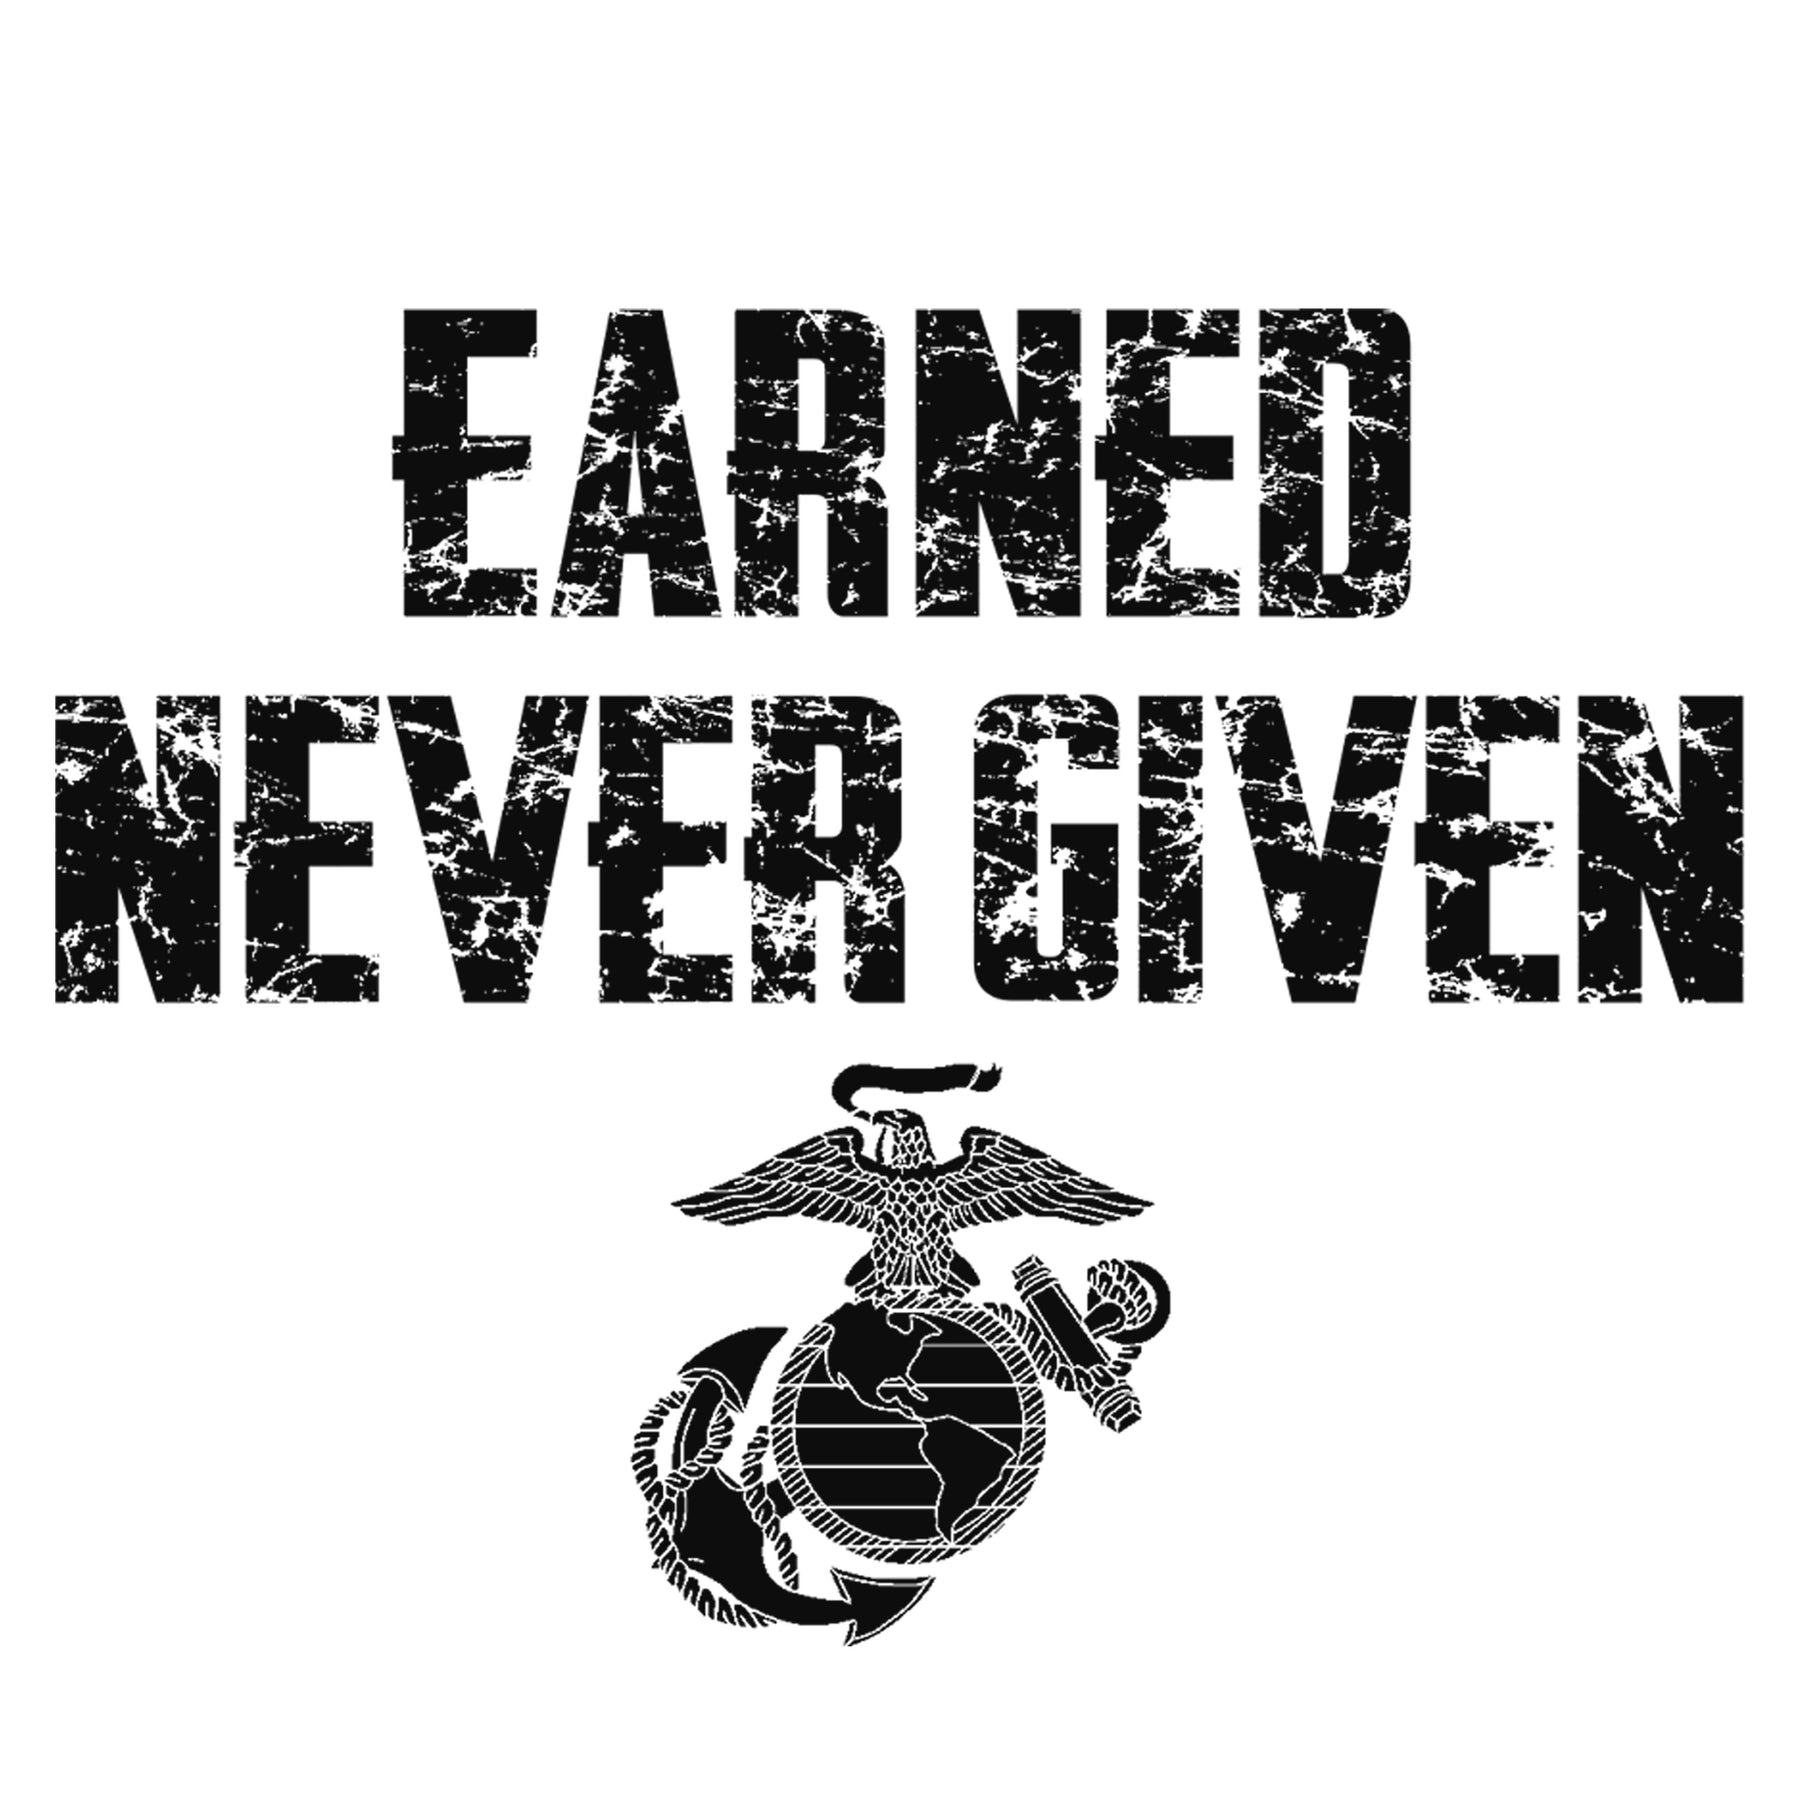 Earned Never Given T-Shirt